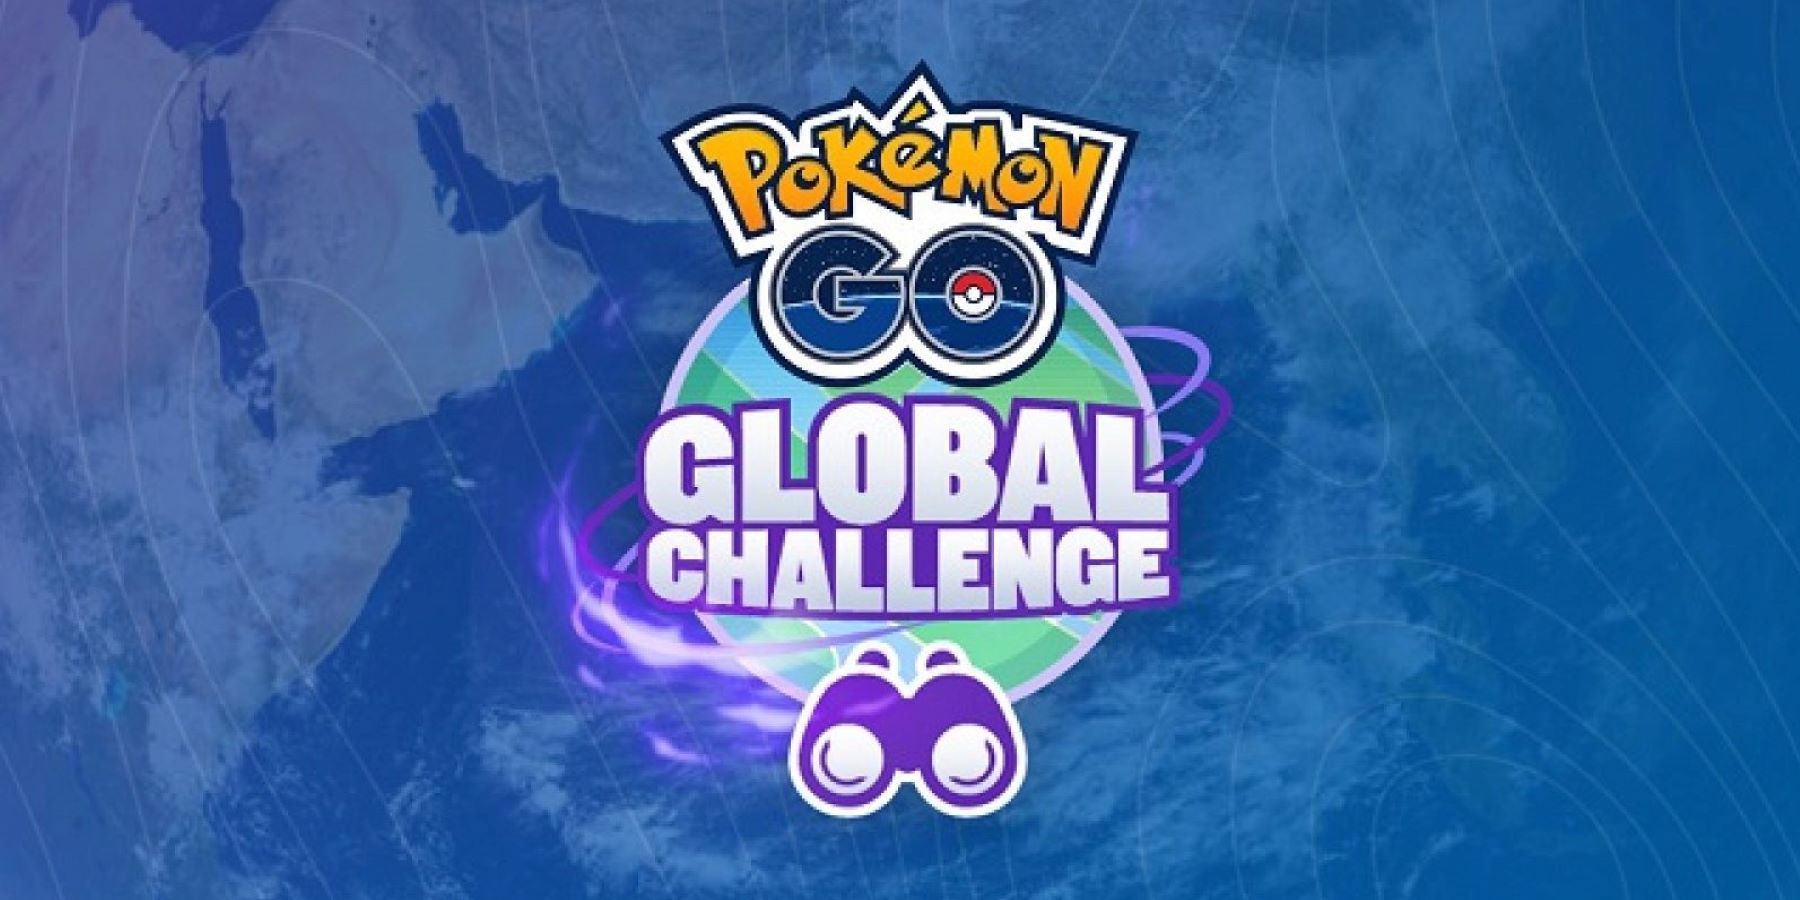 The logo for a Pokemon GO Global Challenge